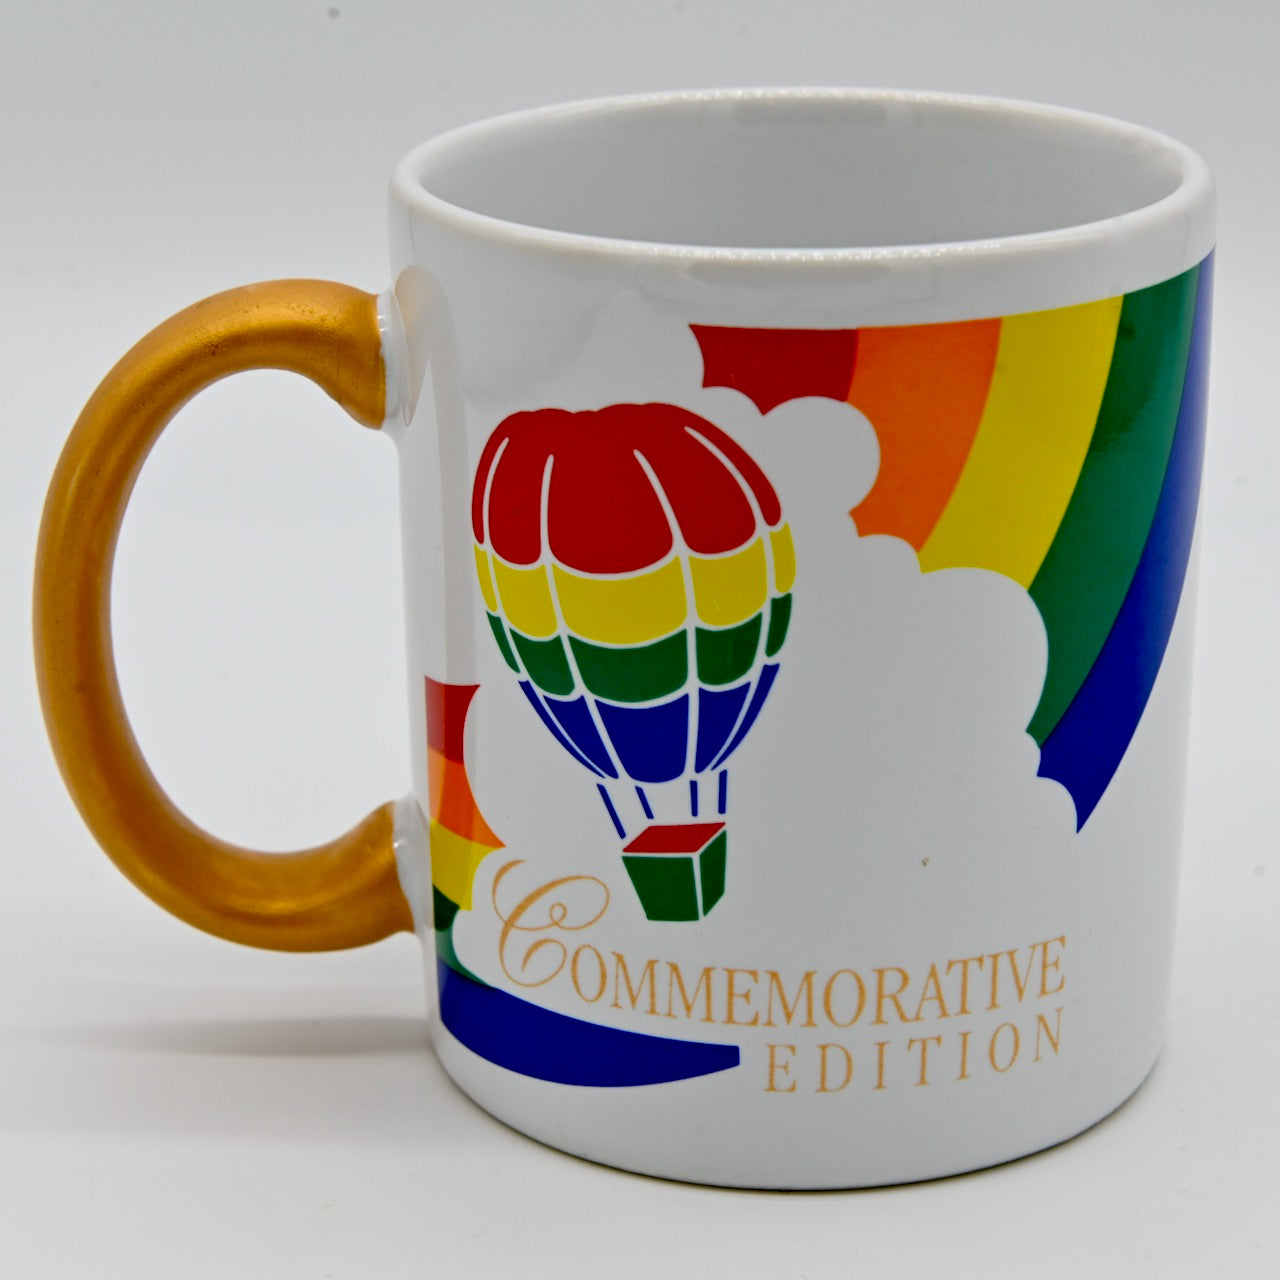 Remember the rainbow mugs from the 80s? FTD 10th Anniversary Collector Edition Pick Me Up Bouquet Mug Features Iconic Rainbow Hot Air Balloon Mug  1984 Teleflora Flowers Send Coffee Cup Tea Collector Collection Decor Advertising Promo Floral  Container Forget Me Not Drinks Drinking Mugs Cups Ceramic Vintage Retro Fun 